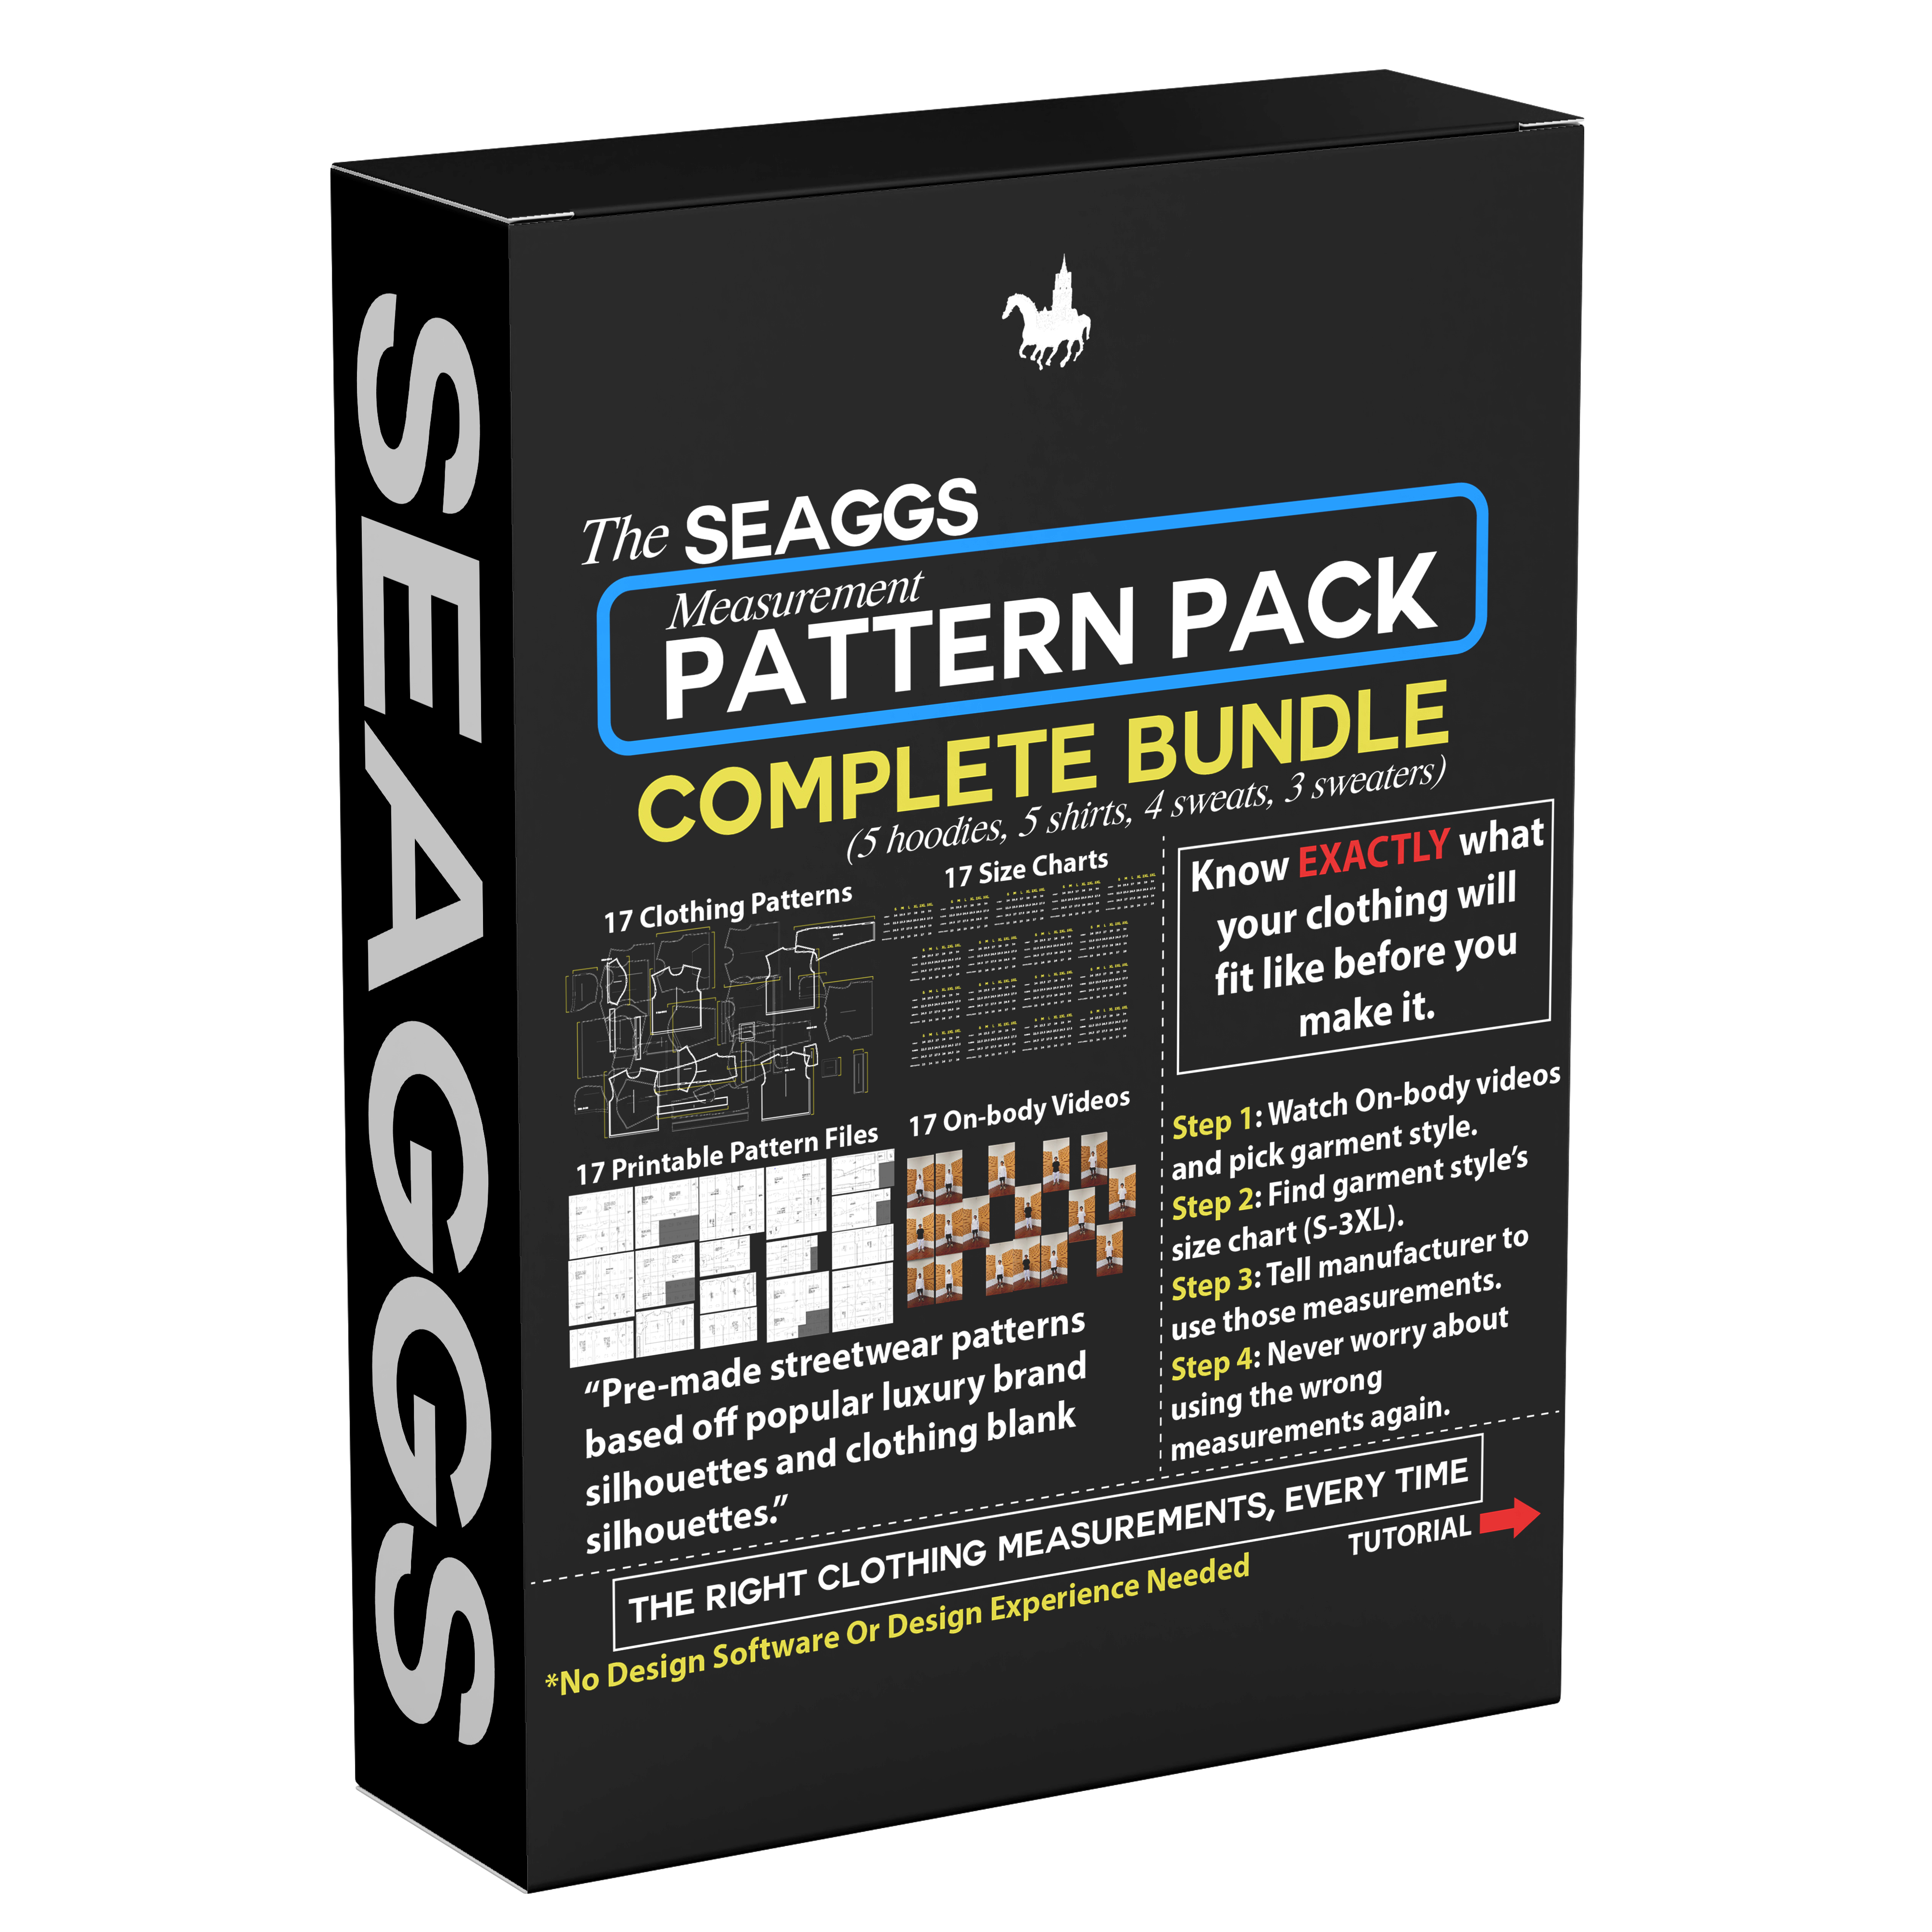 Seaggs Pattern Pack COMPLETE BUNDLE